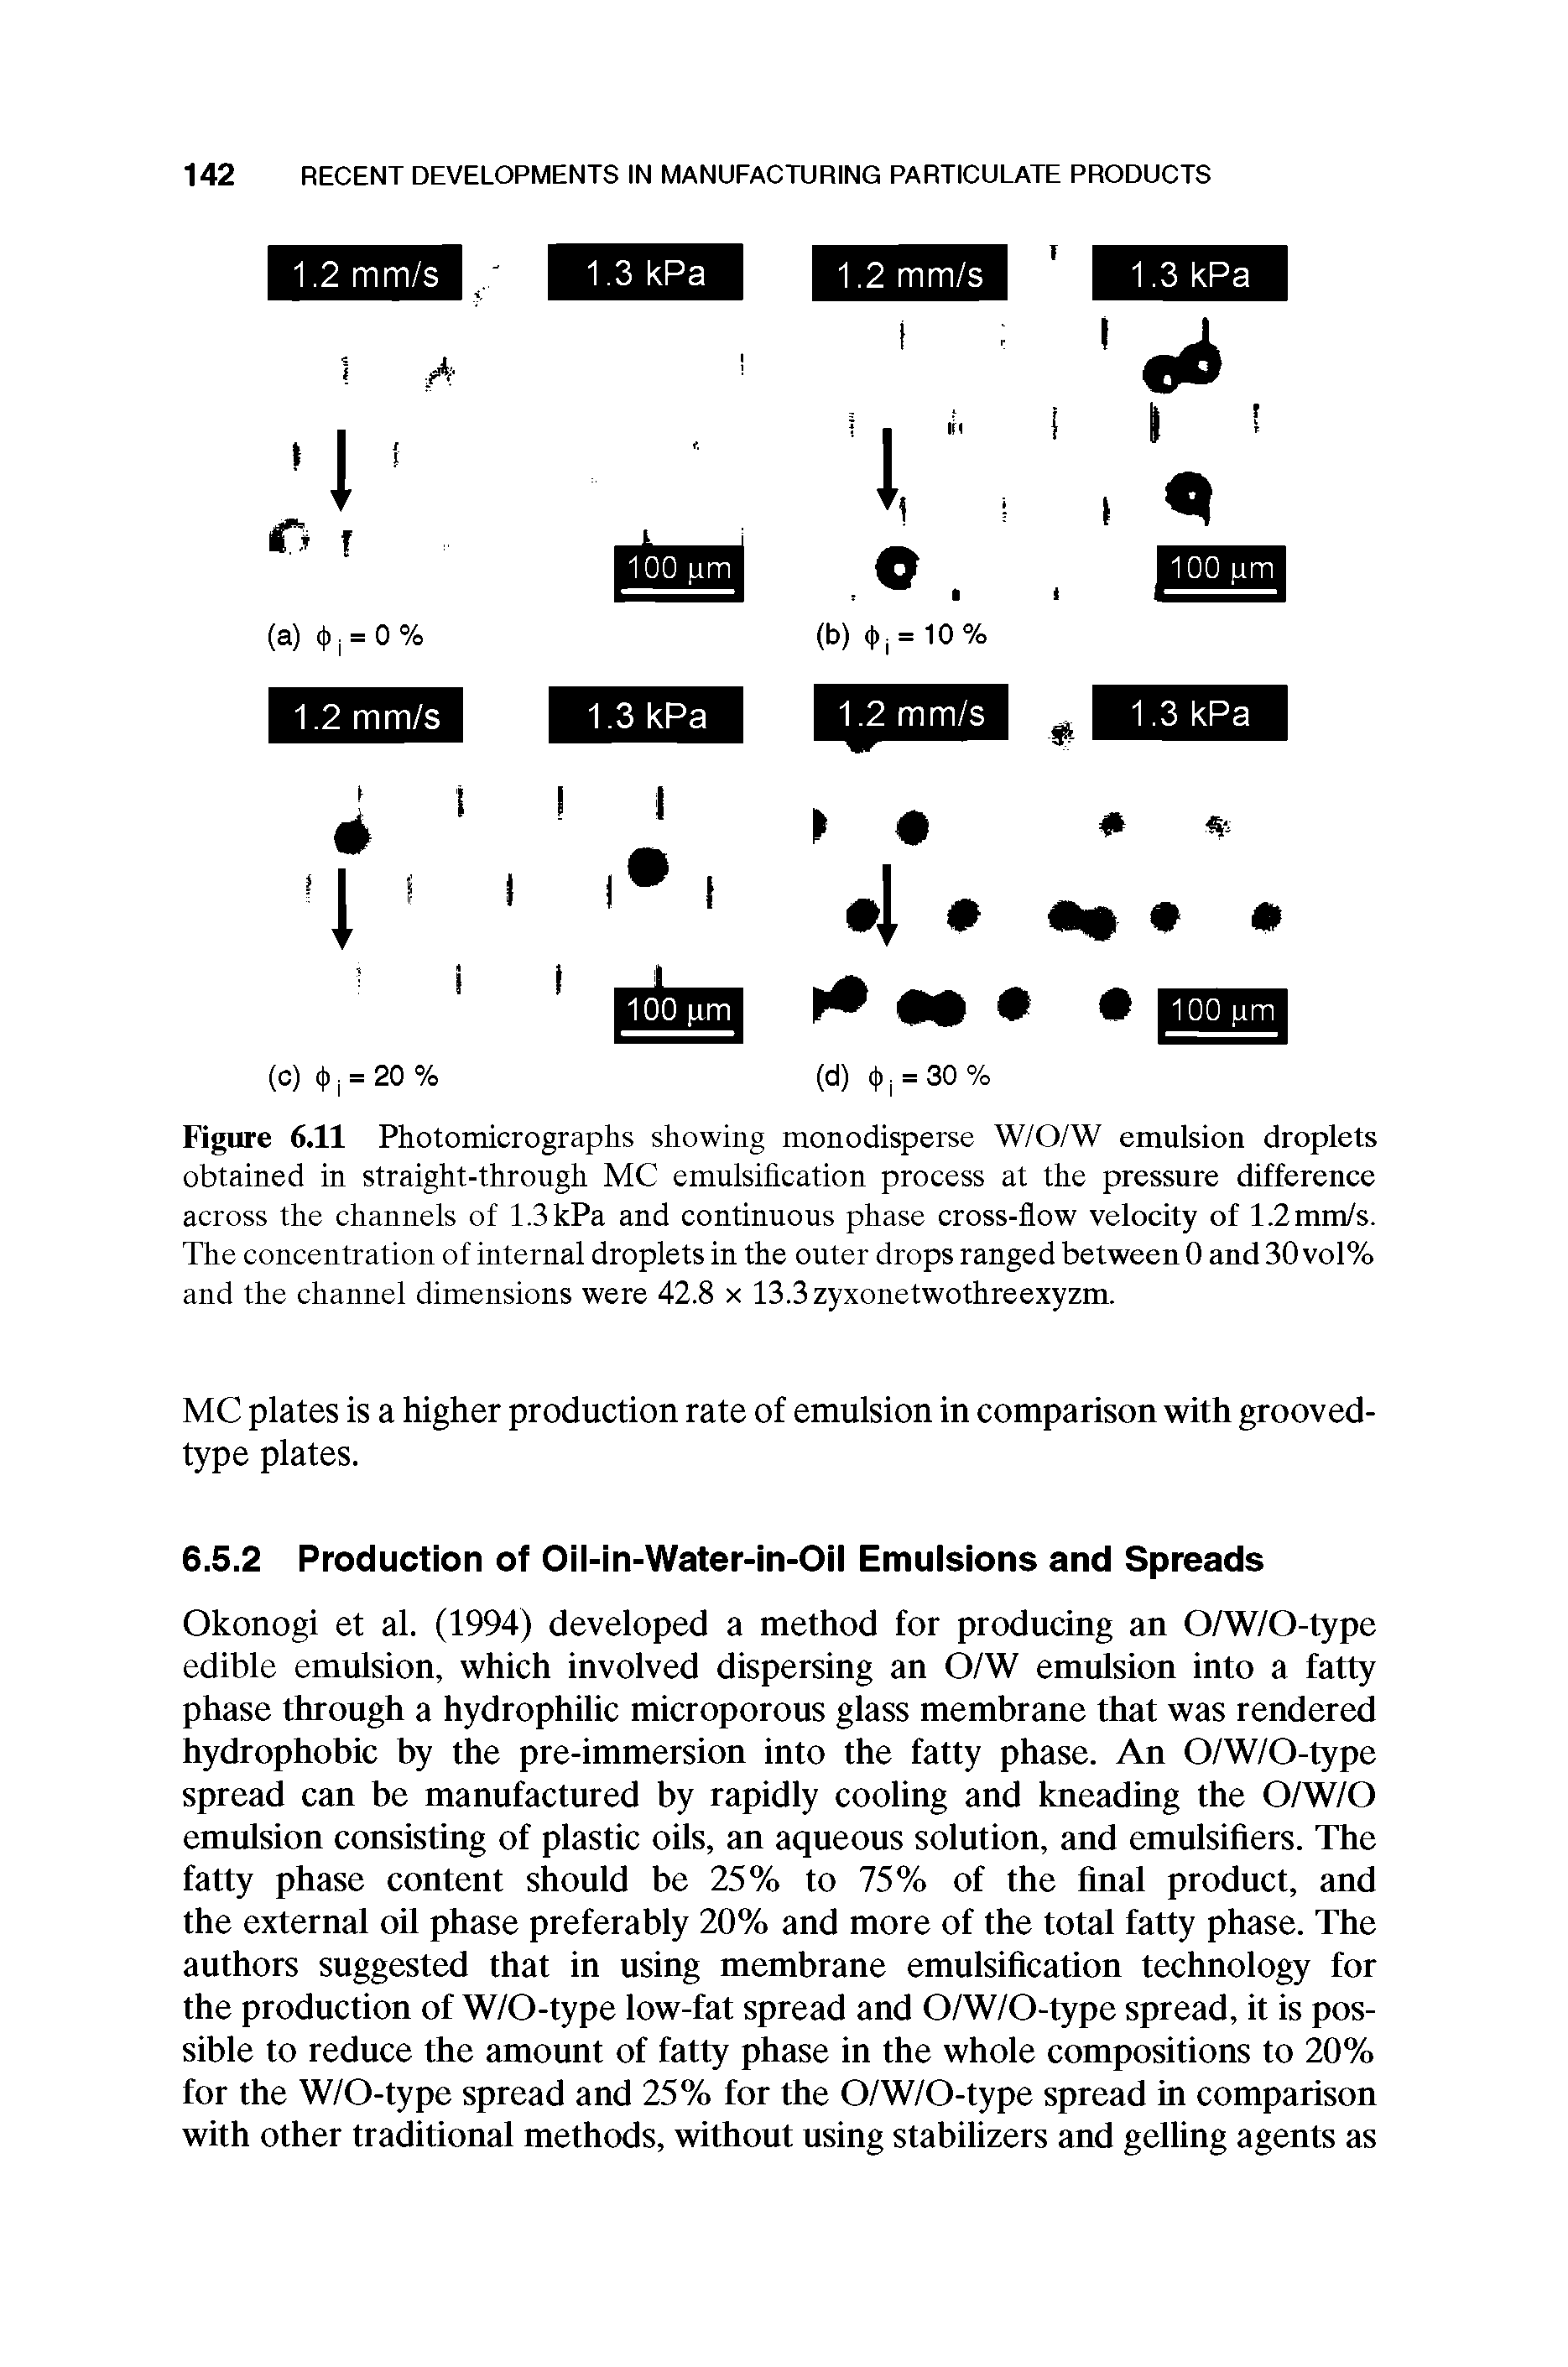 Figure 6.11 Photomicrographs showing monodisperse W/O/W emulsion droplets obtained in straight-through MC emulsification process at the pressure difference across the channels of 1.3 kPa and continuous phase cross-flow velocity of 1.2 mm/s. The concentration of internal droplets in the outer drops ranged between 0 and 30 vol% and the channel dimensions were 42.8 x 13.3zyxonetwothreexyzm.